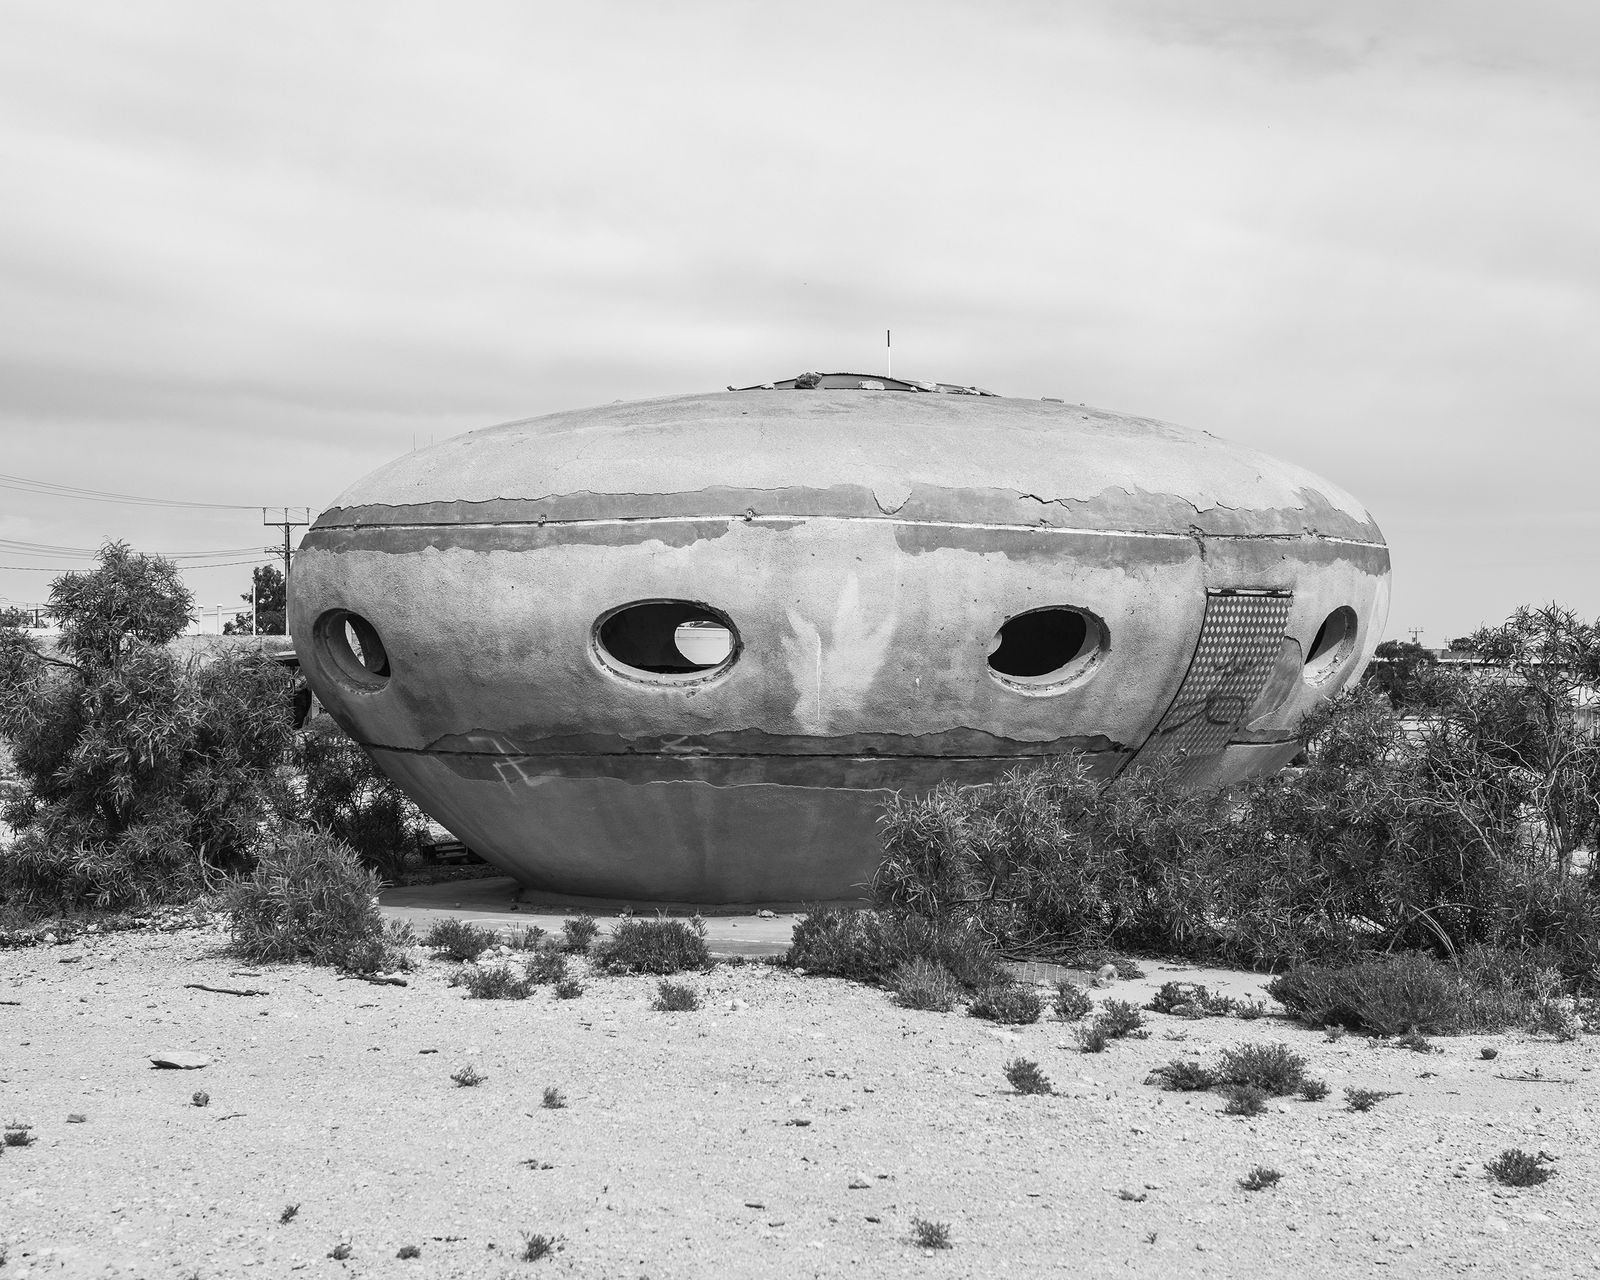 © Antoine Bruy - The Flying Saucer with a Swastika, Coober Pedy, Australia, 2016